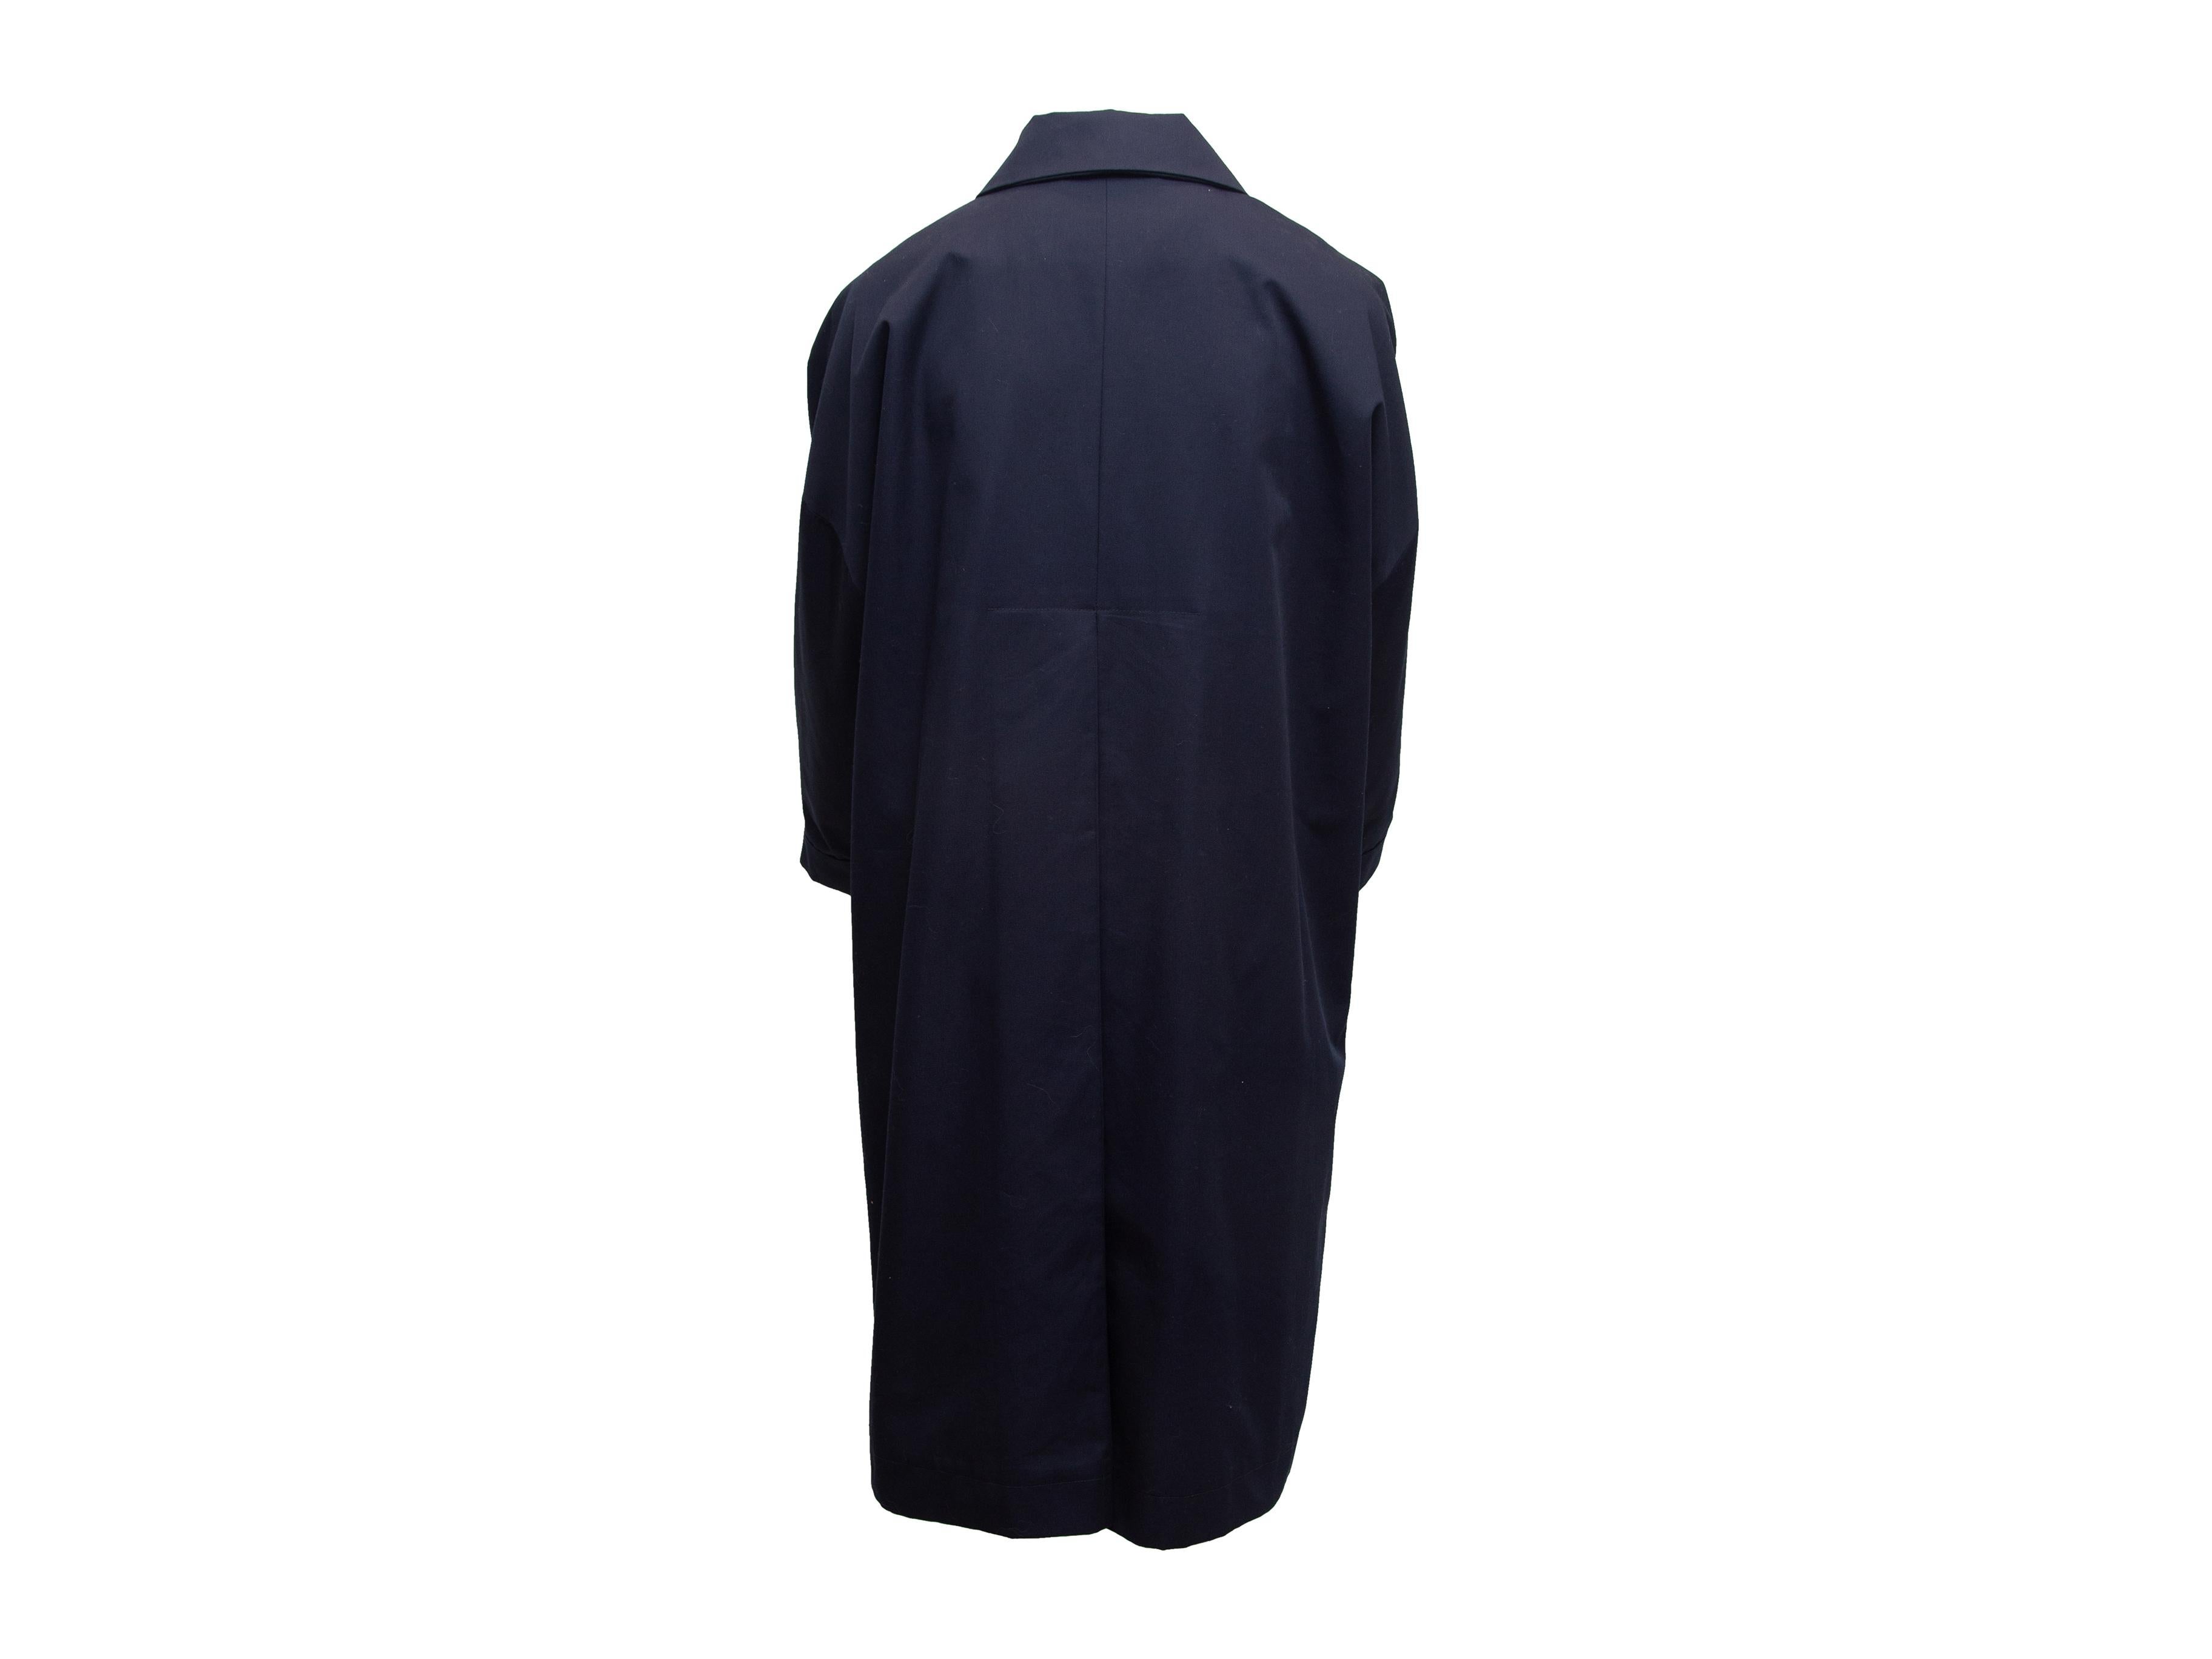 Product details: Navy long coat by Alfa Perro. Pointed collar. Button and tie closures at front. 44